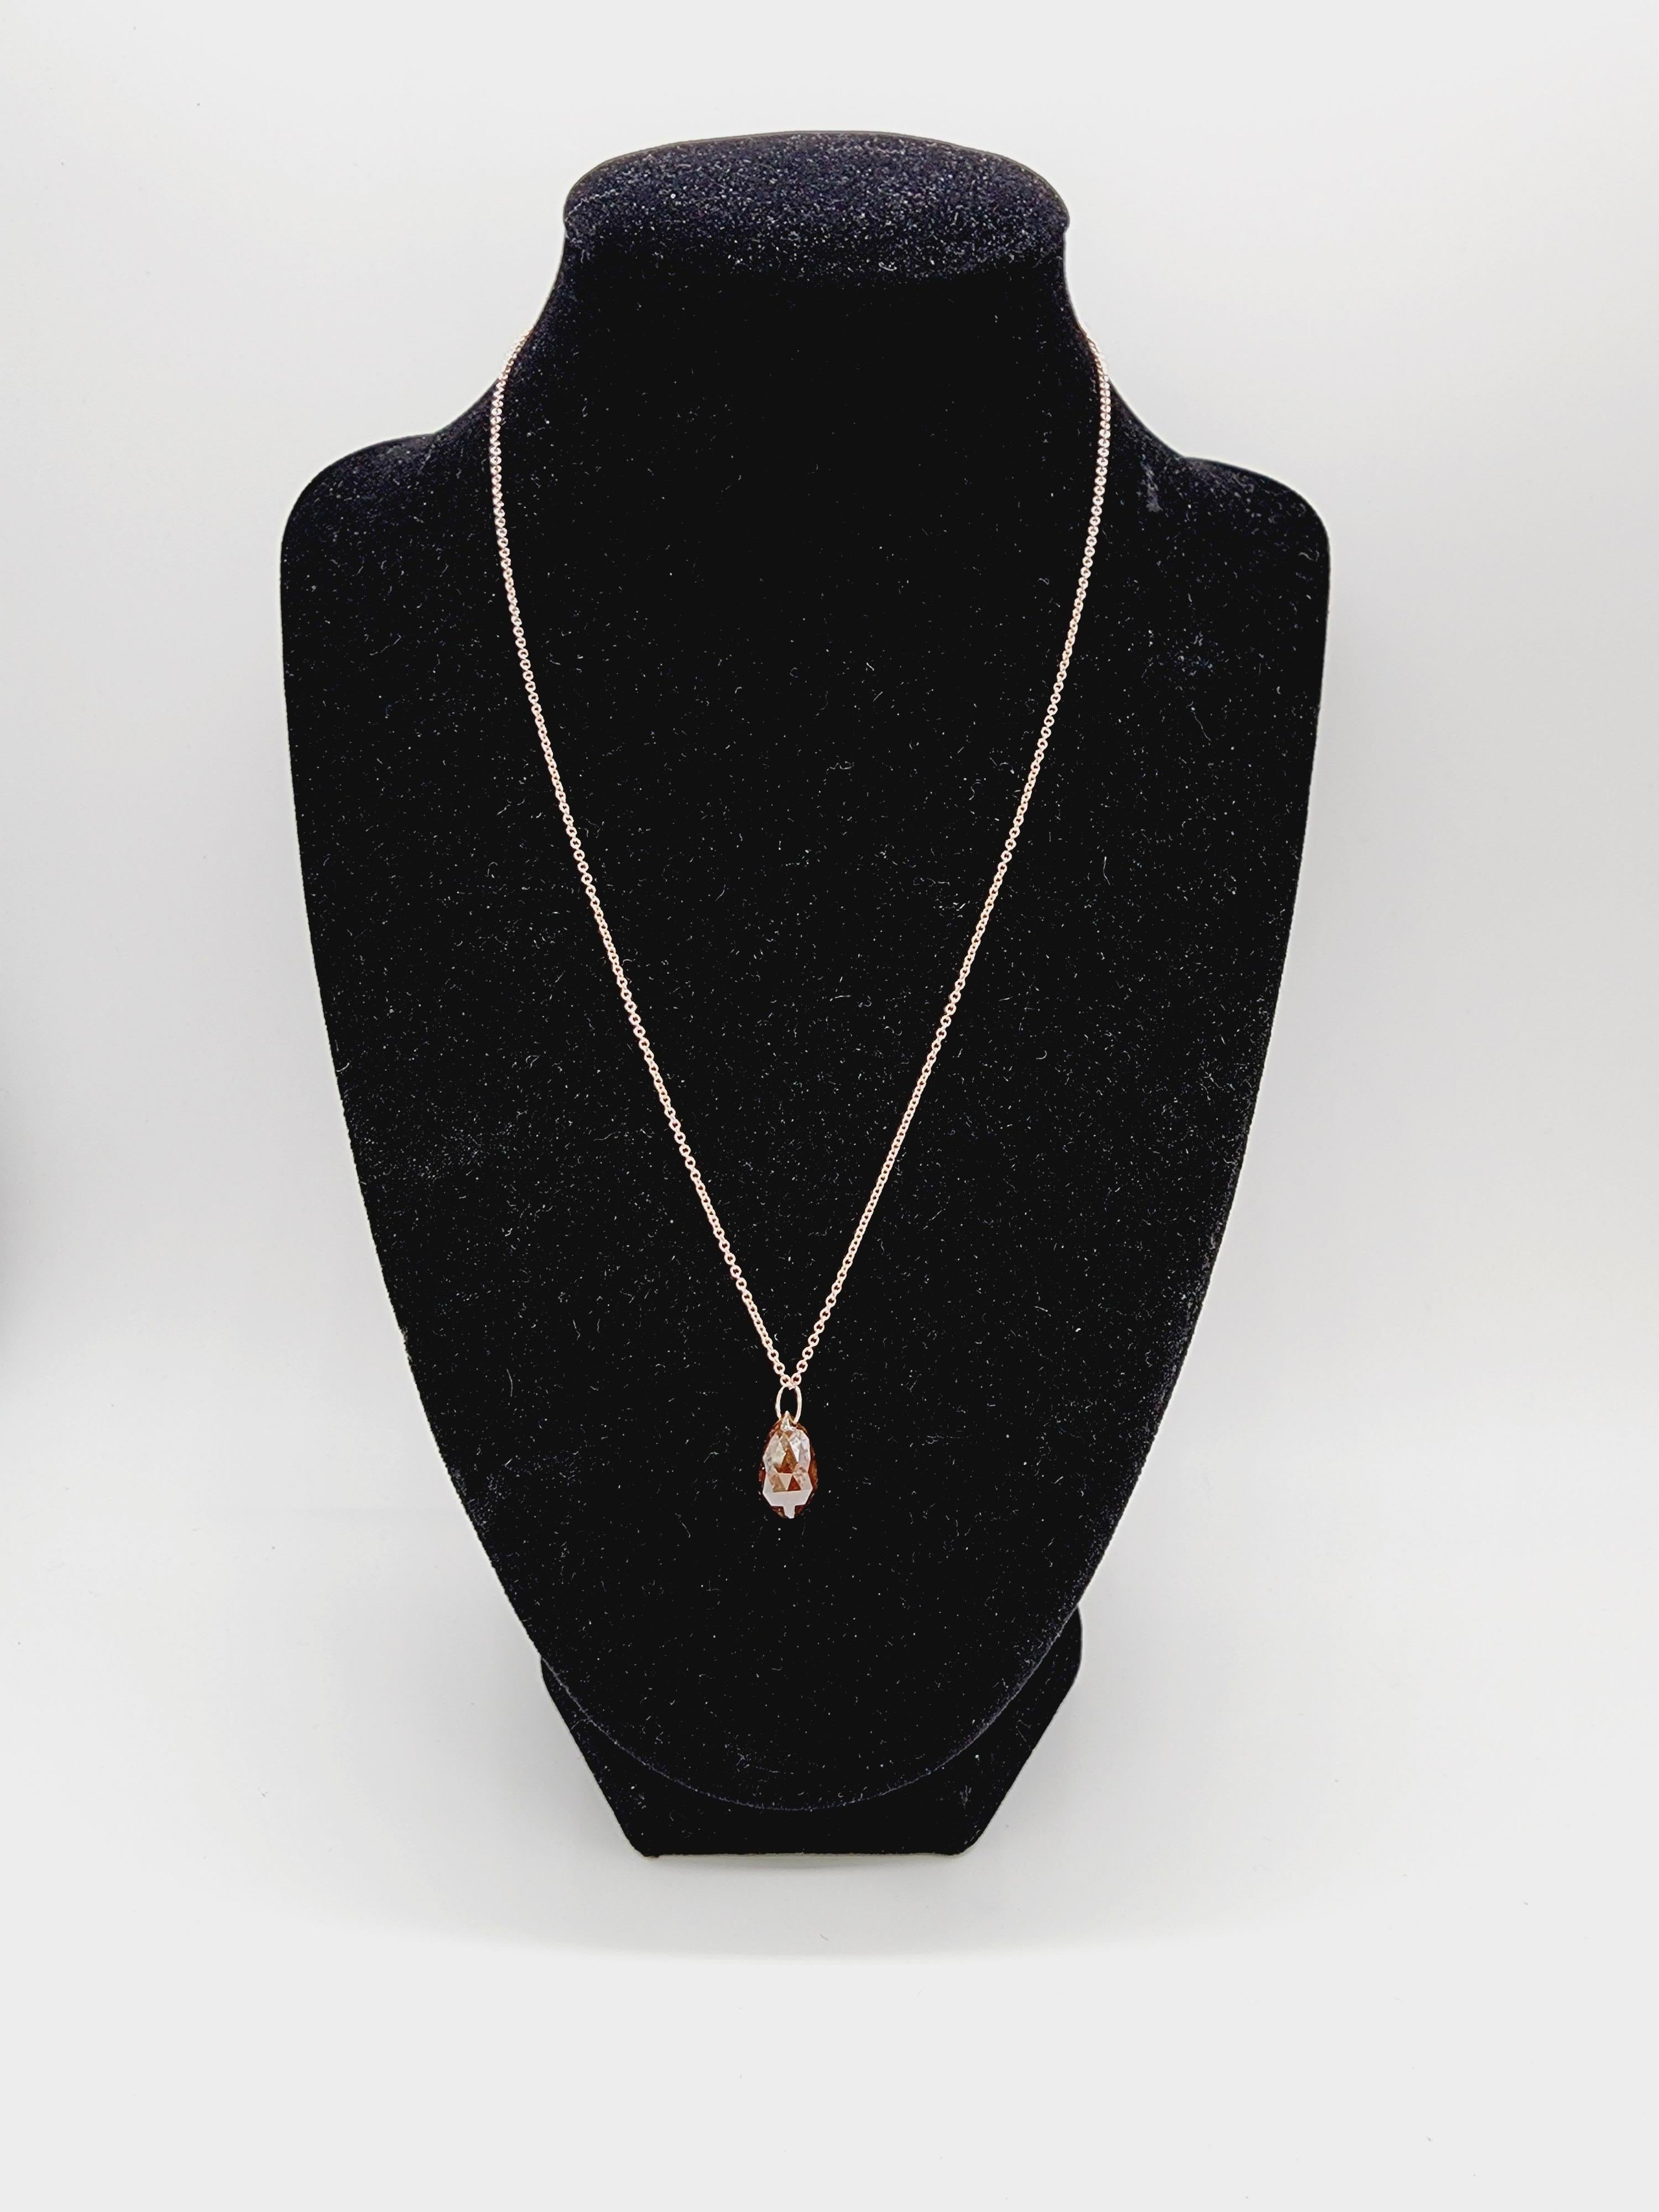 GIA 5.99 Carats Orange Brown Diamond Briolette Pendant Rose Gold 14 Karat.  Featuring a cognac-colored briolette weighing 5.99carats.
Set in 14k rose gold pendant. chain measures 18 inch. easily adjustable to 16 inch with the attached extra loop.